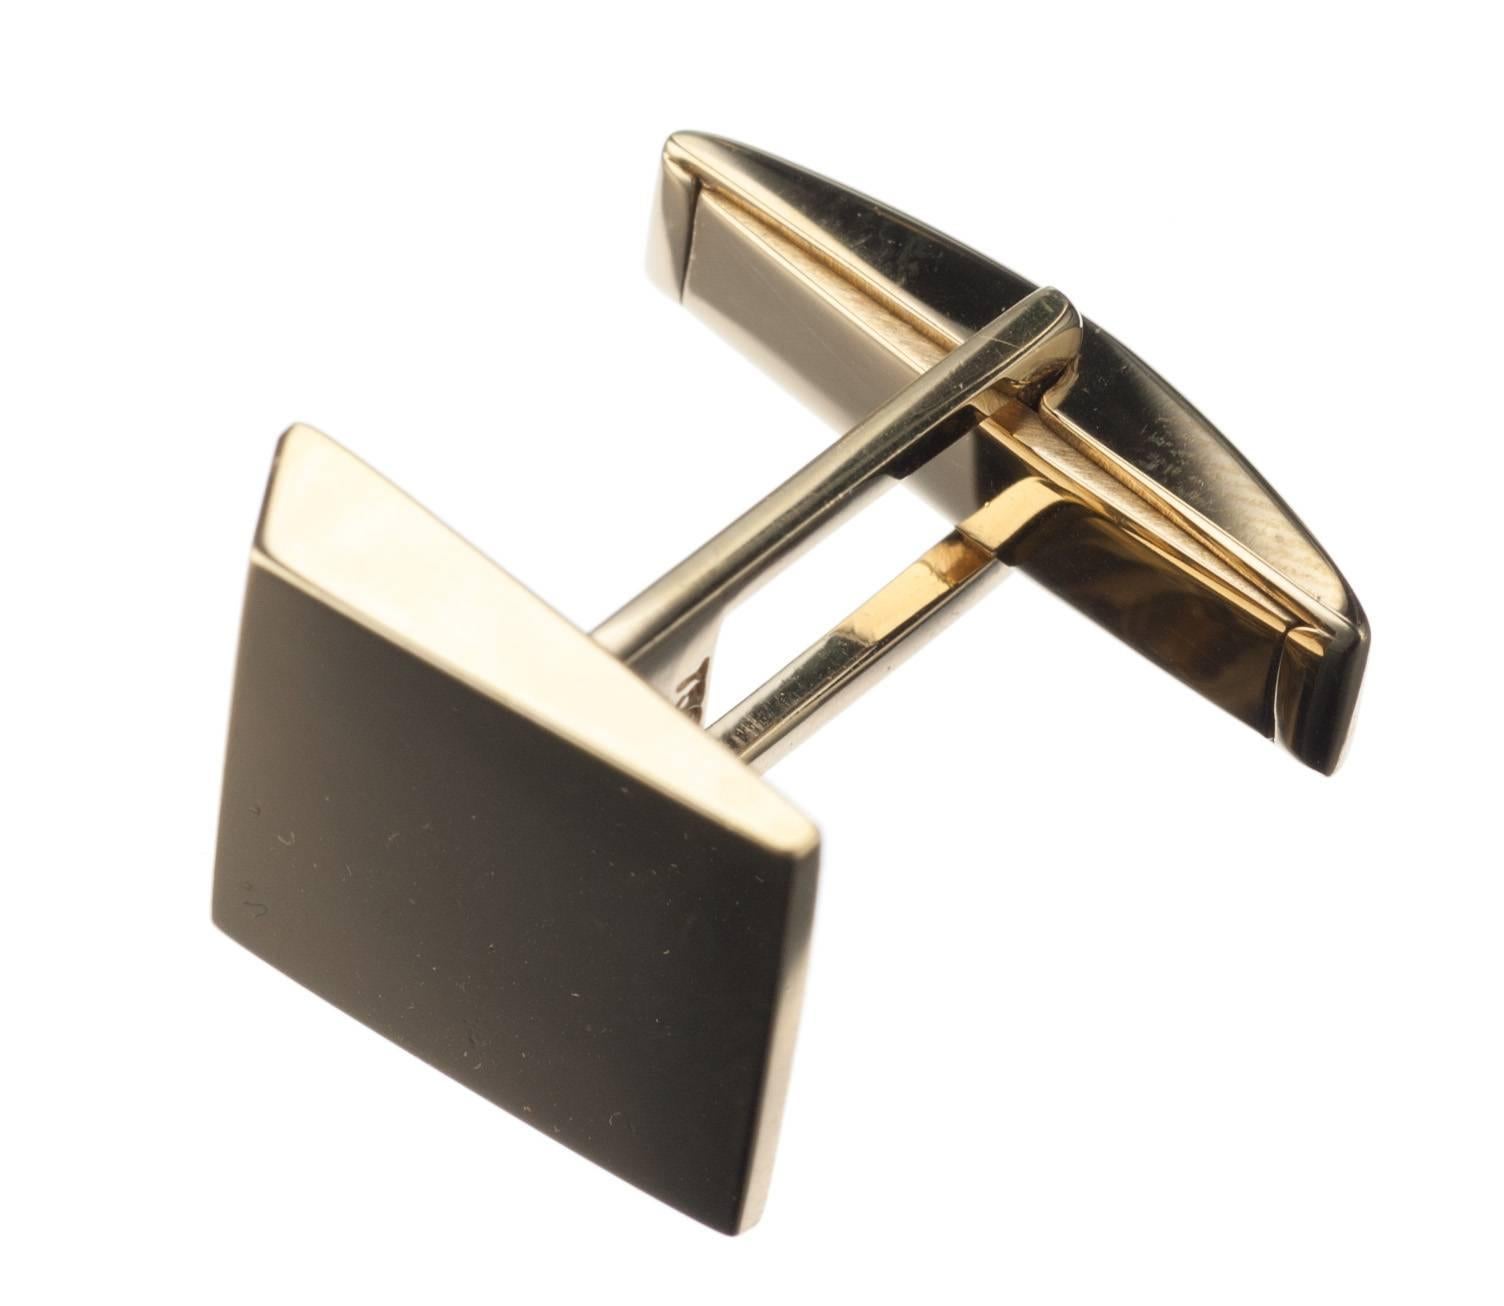 With glinting high polish 18-karat yellow gold certain to garner attention, a pair of wedge shaped cufflinks fastened with swivel backs. Measure approx. 0.5” square. 